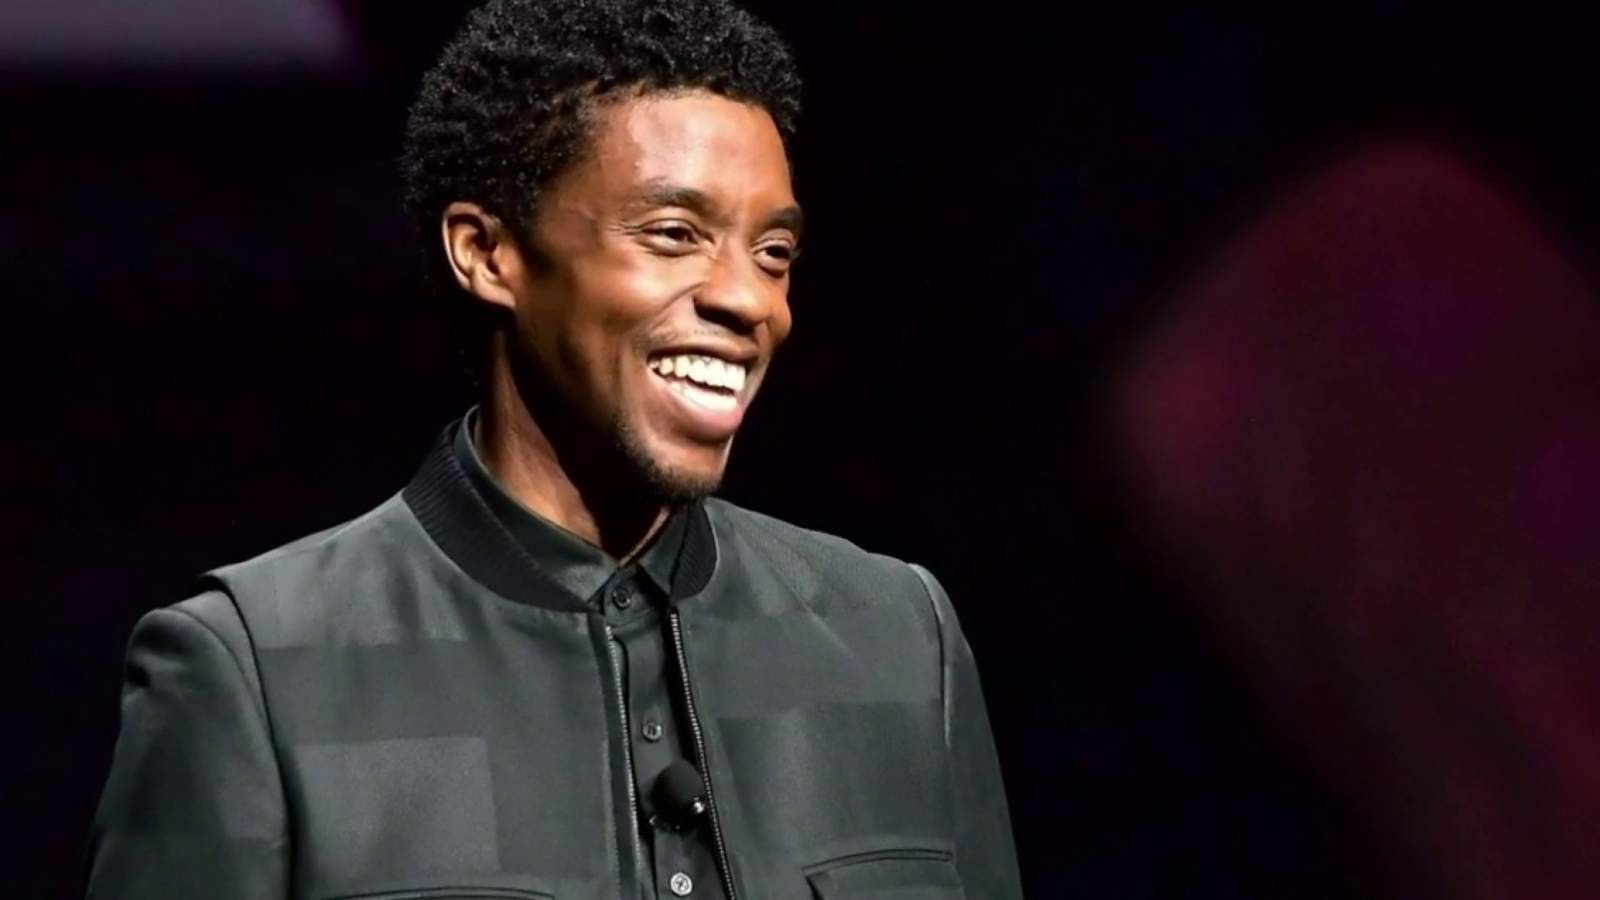 Death of Chadwick Boseman spotlights rising number of young people with colon cancer